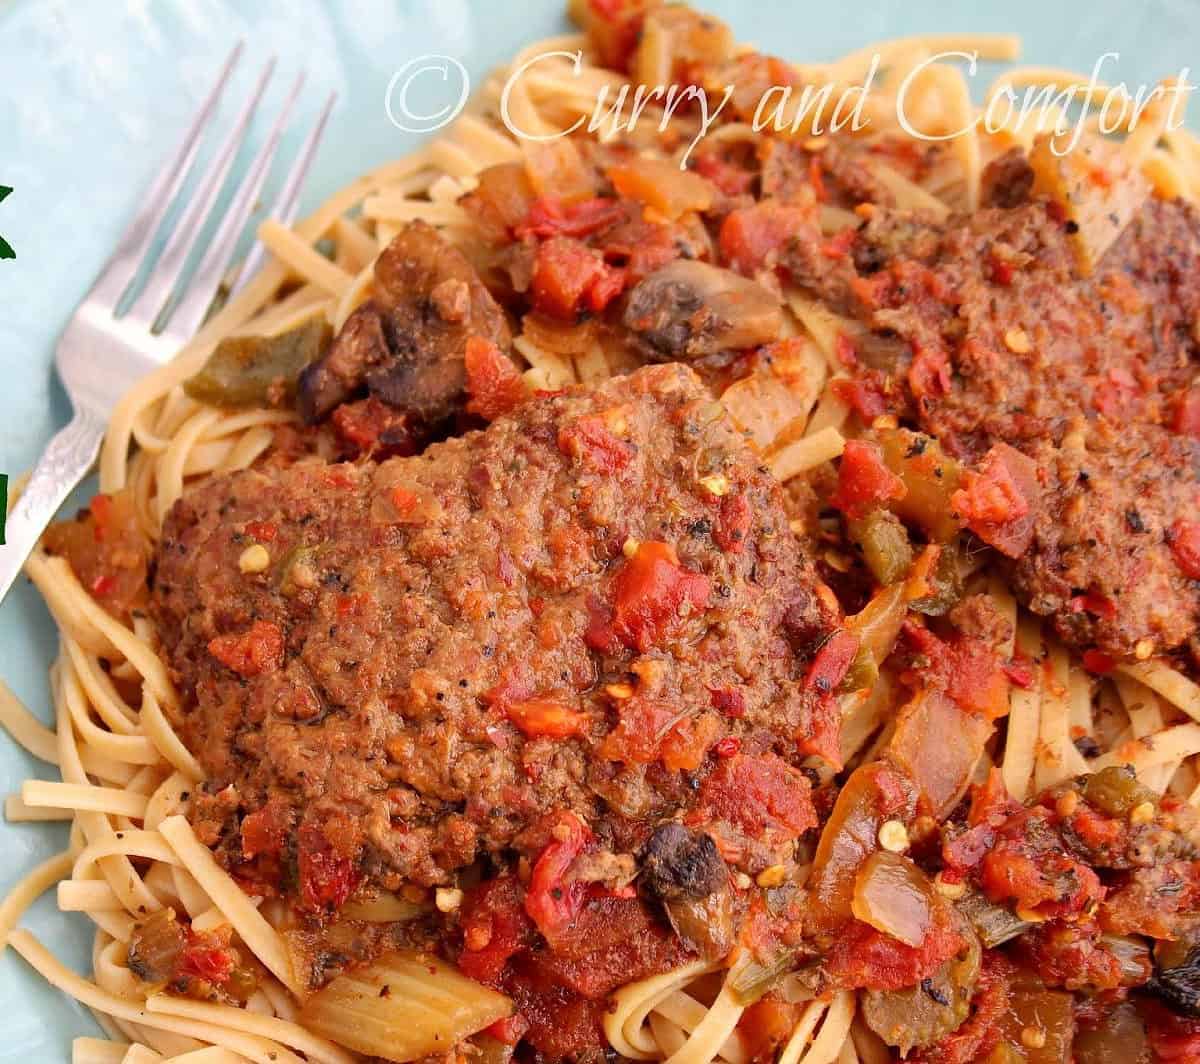  Flavorful tomato sauce and tenderized steak in every bite